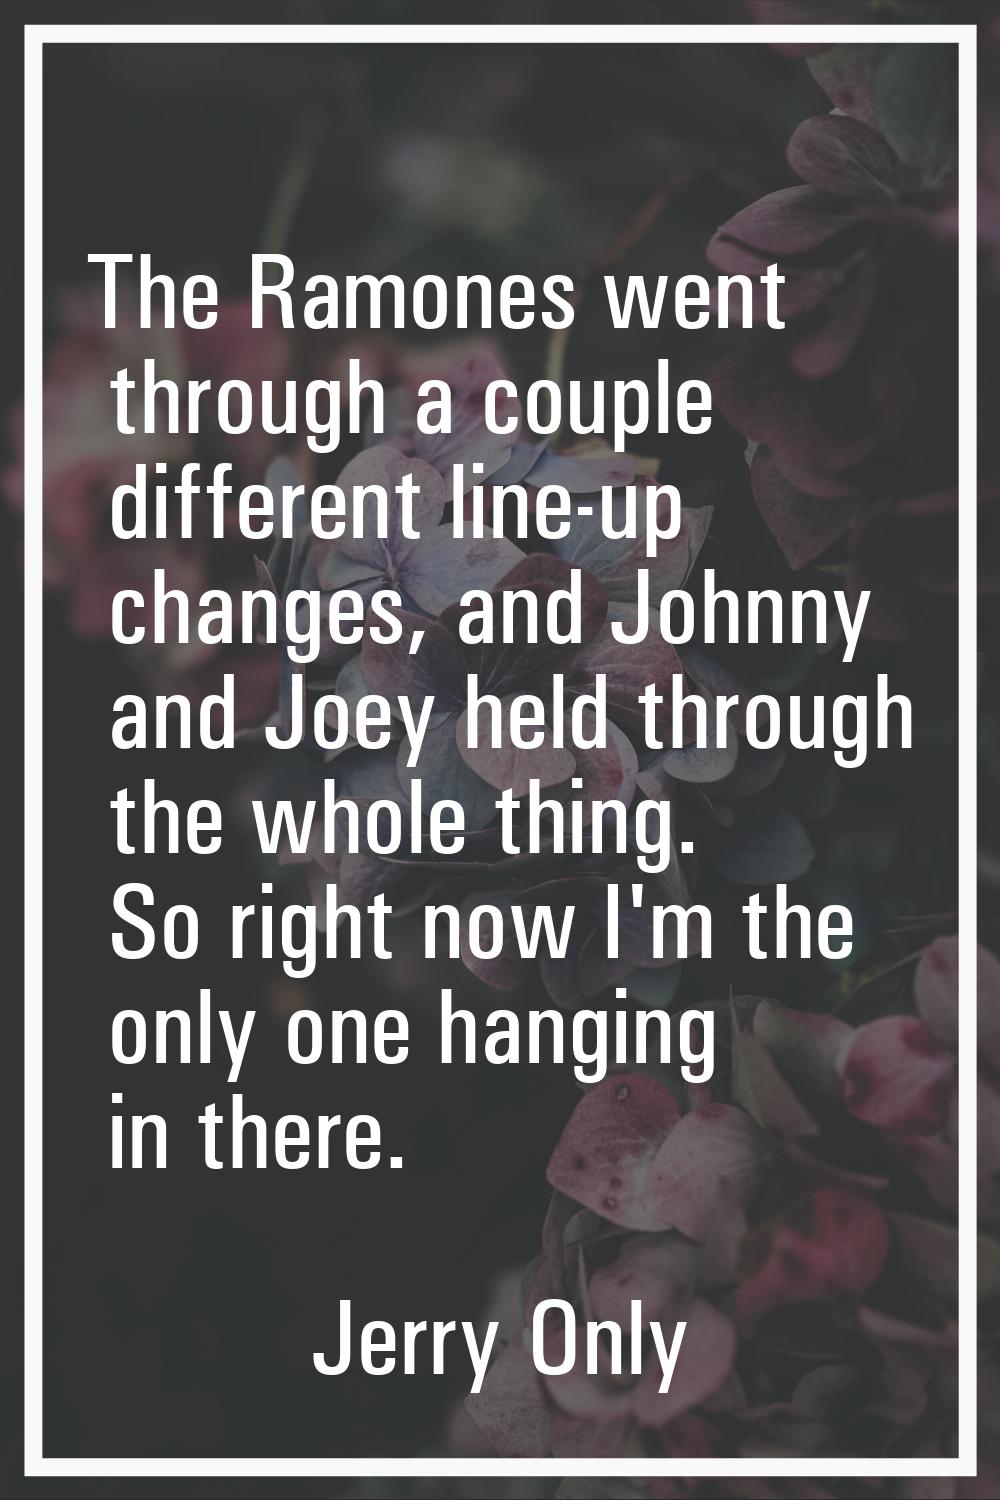 The Ramones went through a couple different line-up changes, and Johnny and Joey held through the w